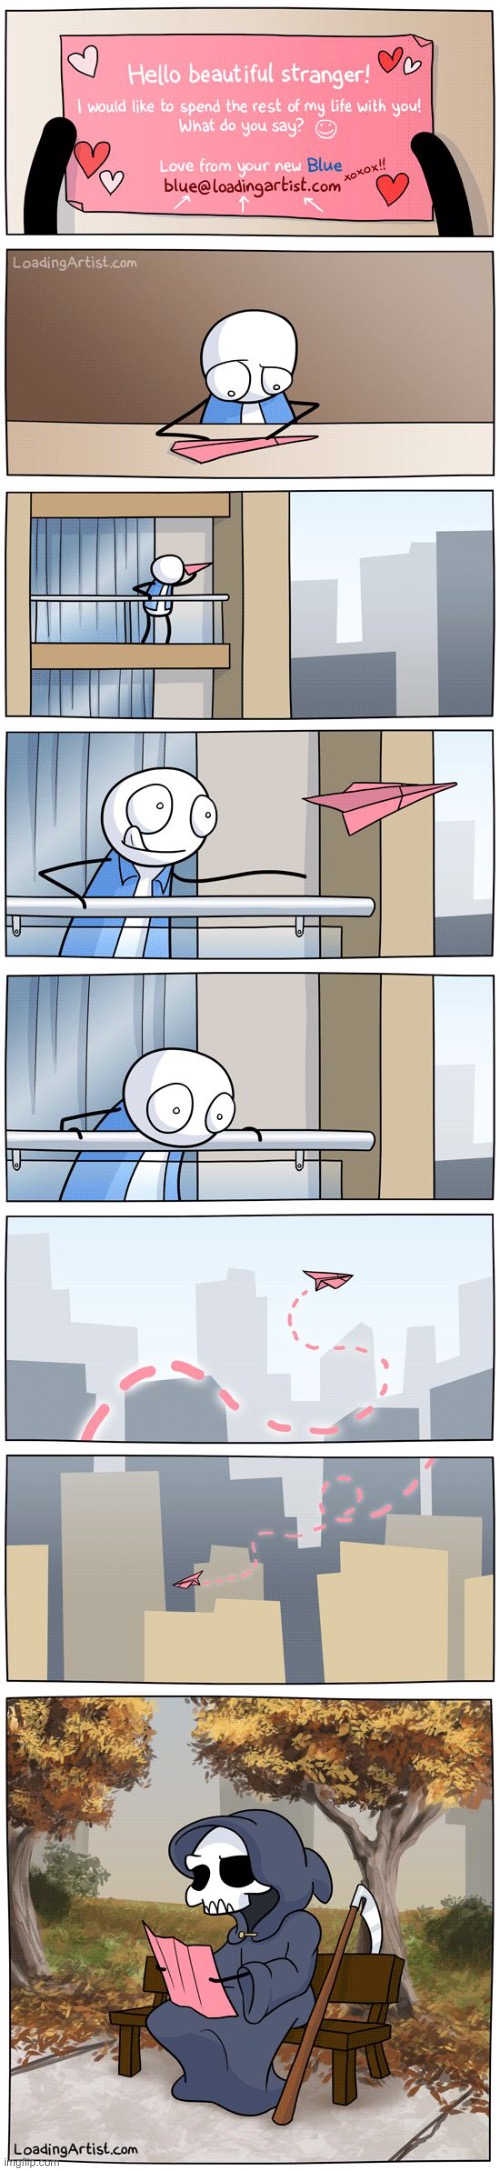 Who would ever do this (#1,395) | image tagged in comics/cartoons,comics,loading,artist,airplane,love | made w/ Imgflip meme maker